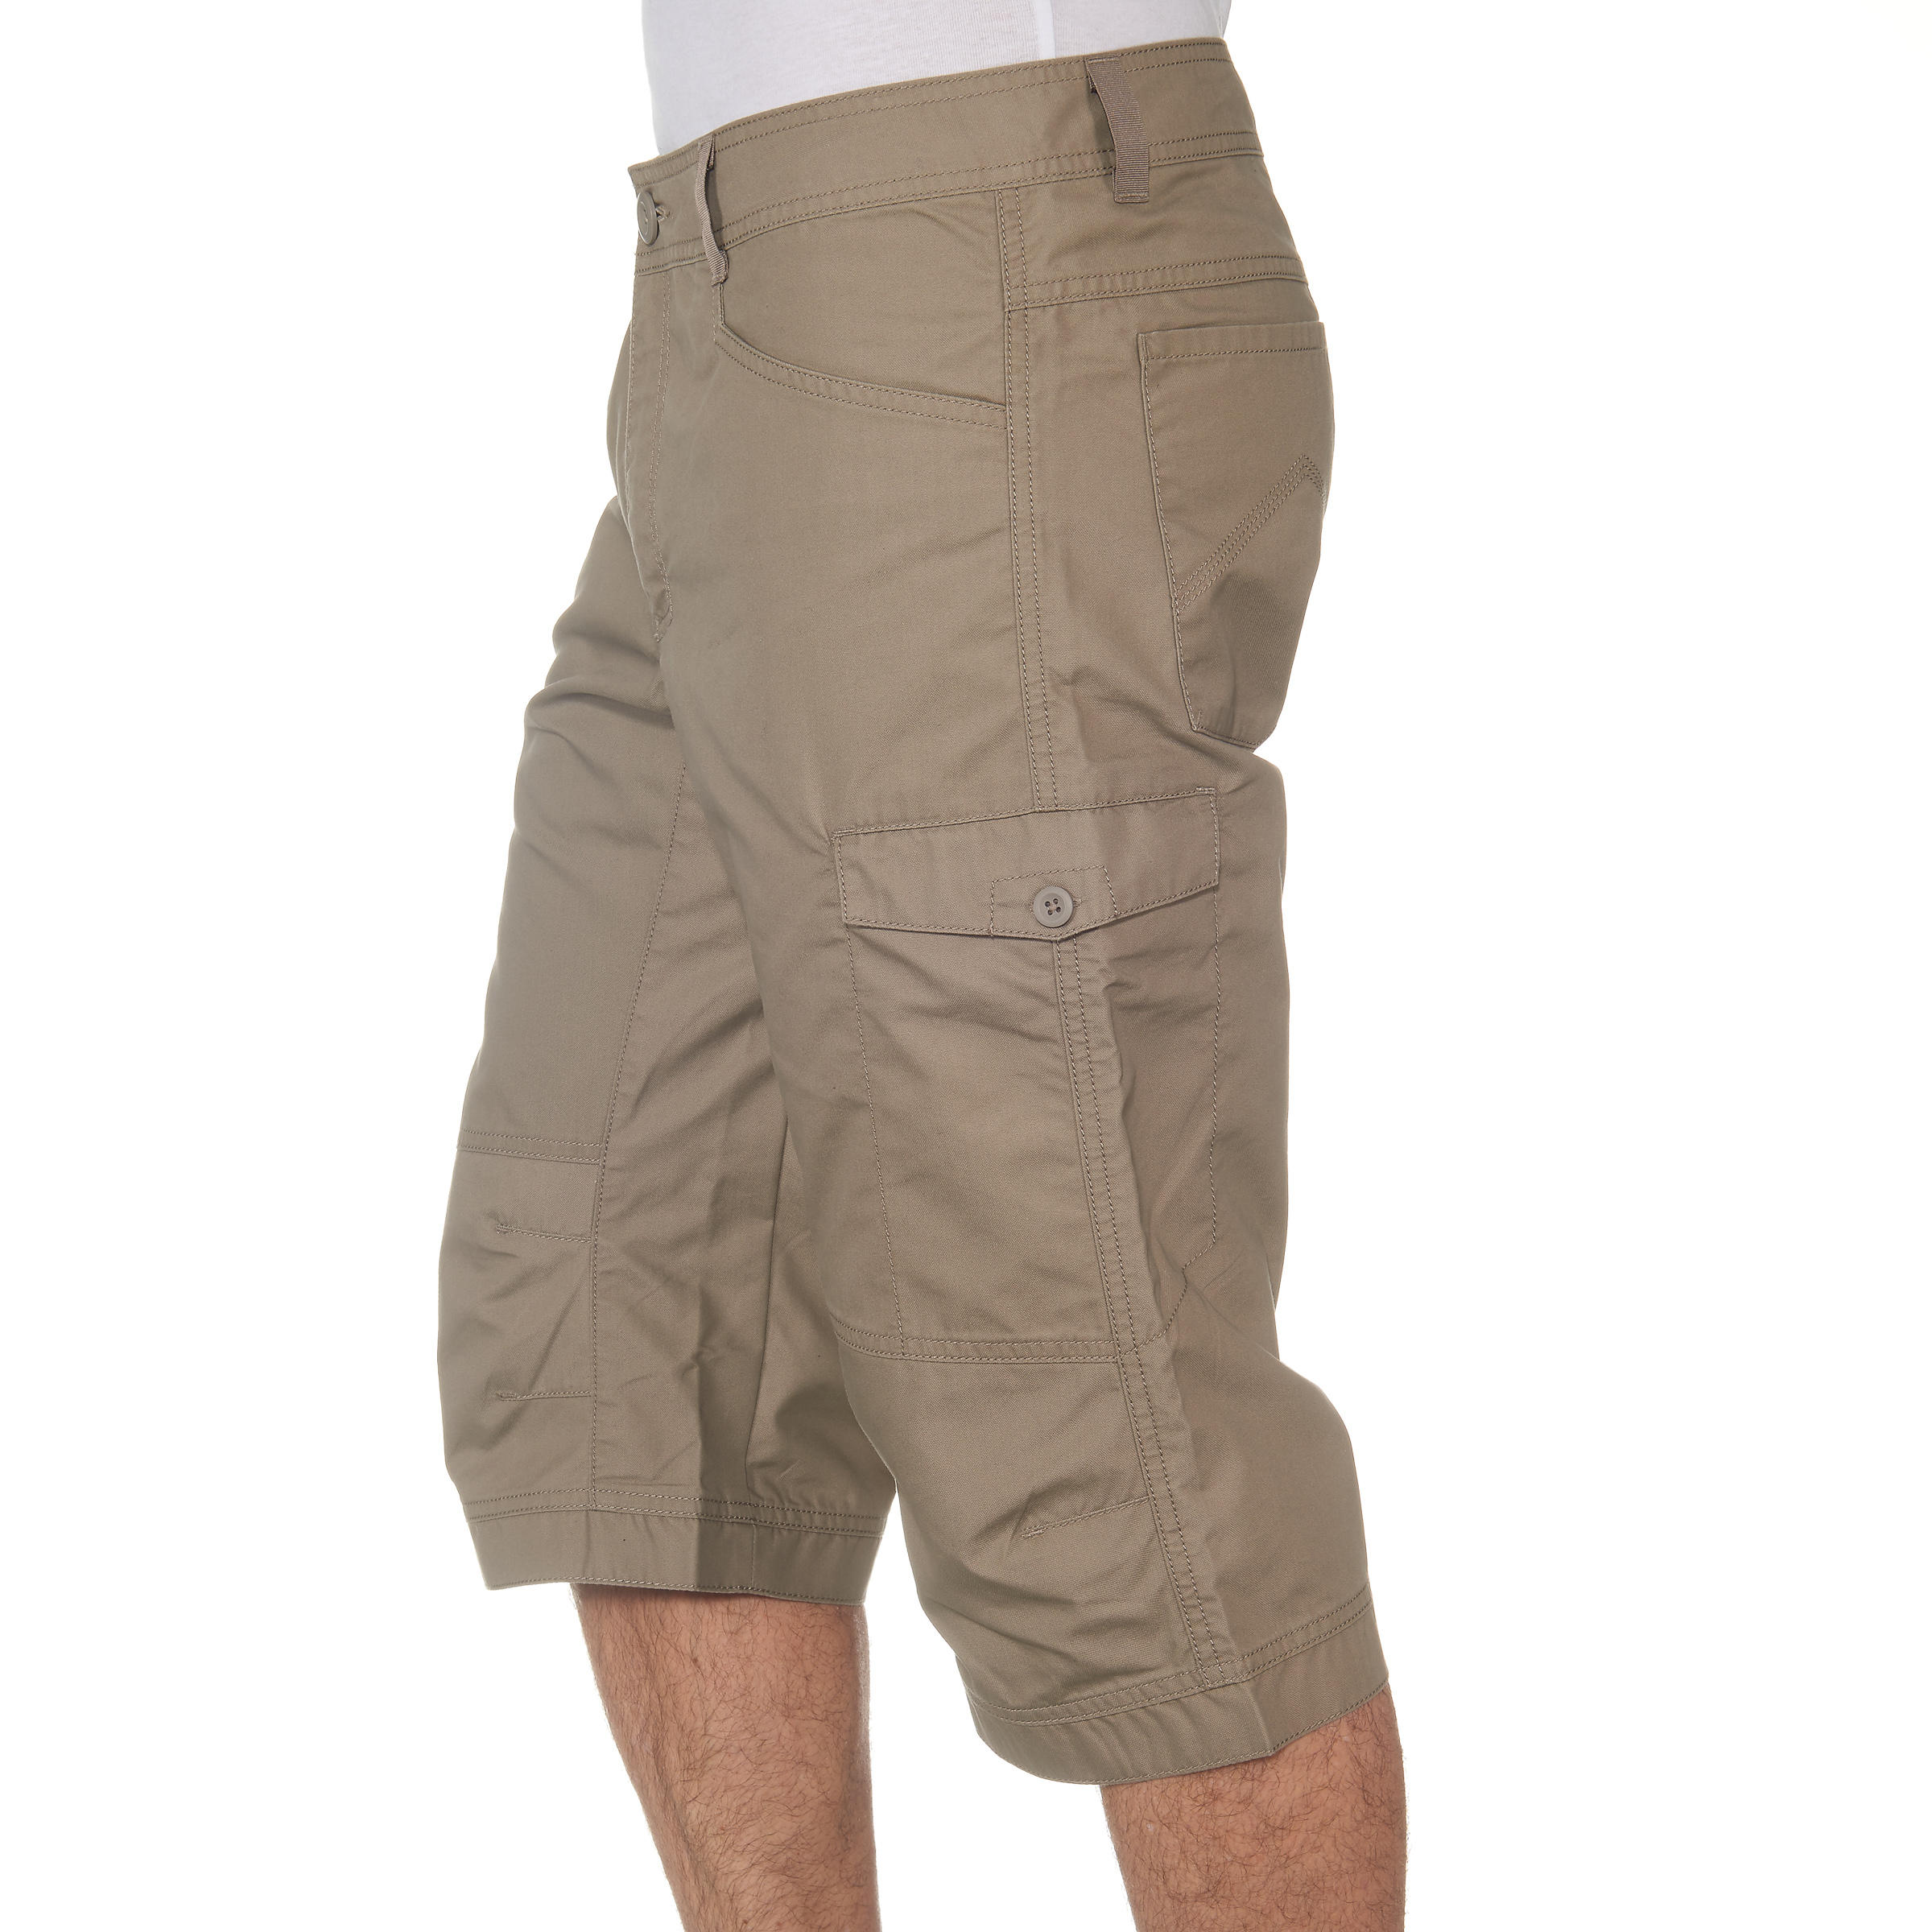 Mens 3/4 Length Cargo Pants Shorts Baggy Casual Cotton Trousers Plus Size  Solid | eBay